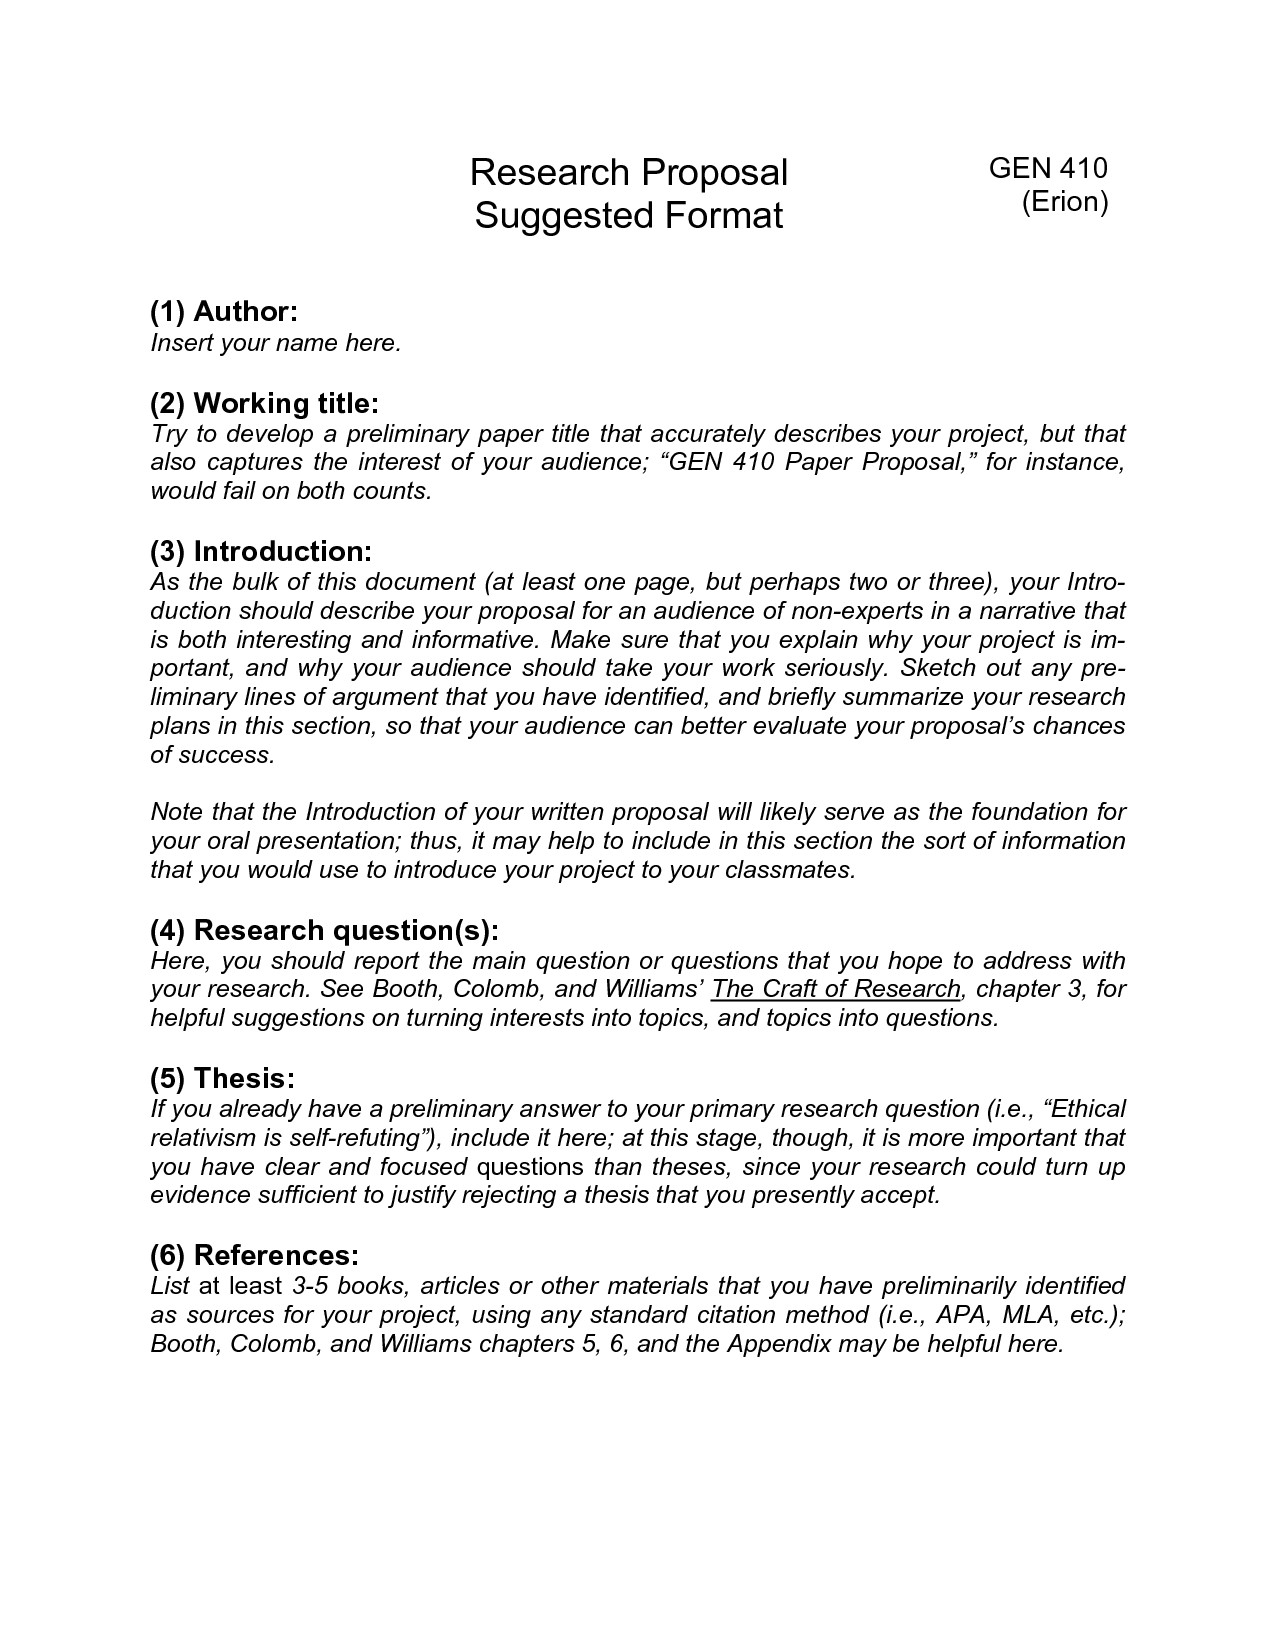 Research Paper Proposal Template What Constitutes A Quality Research Proposal How to